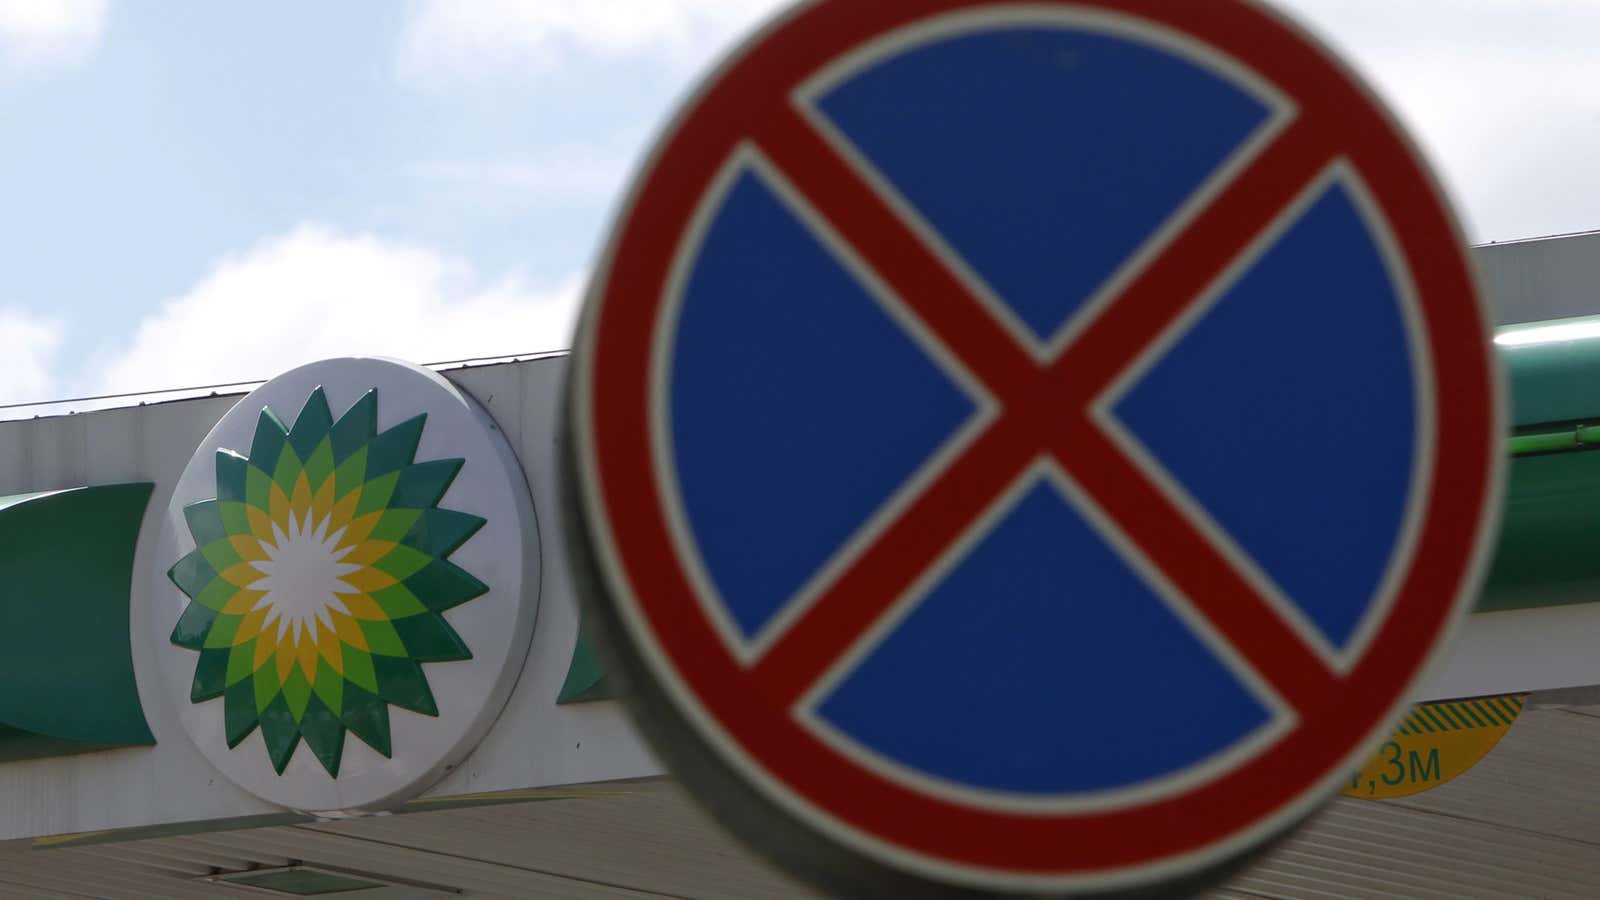 End of the line for BP’s Russia venture.